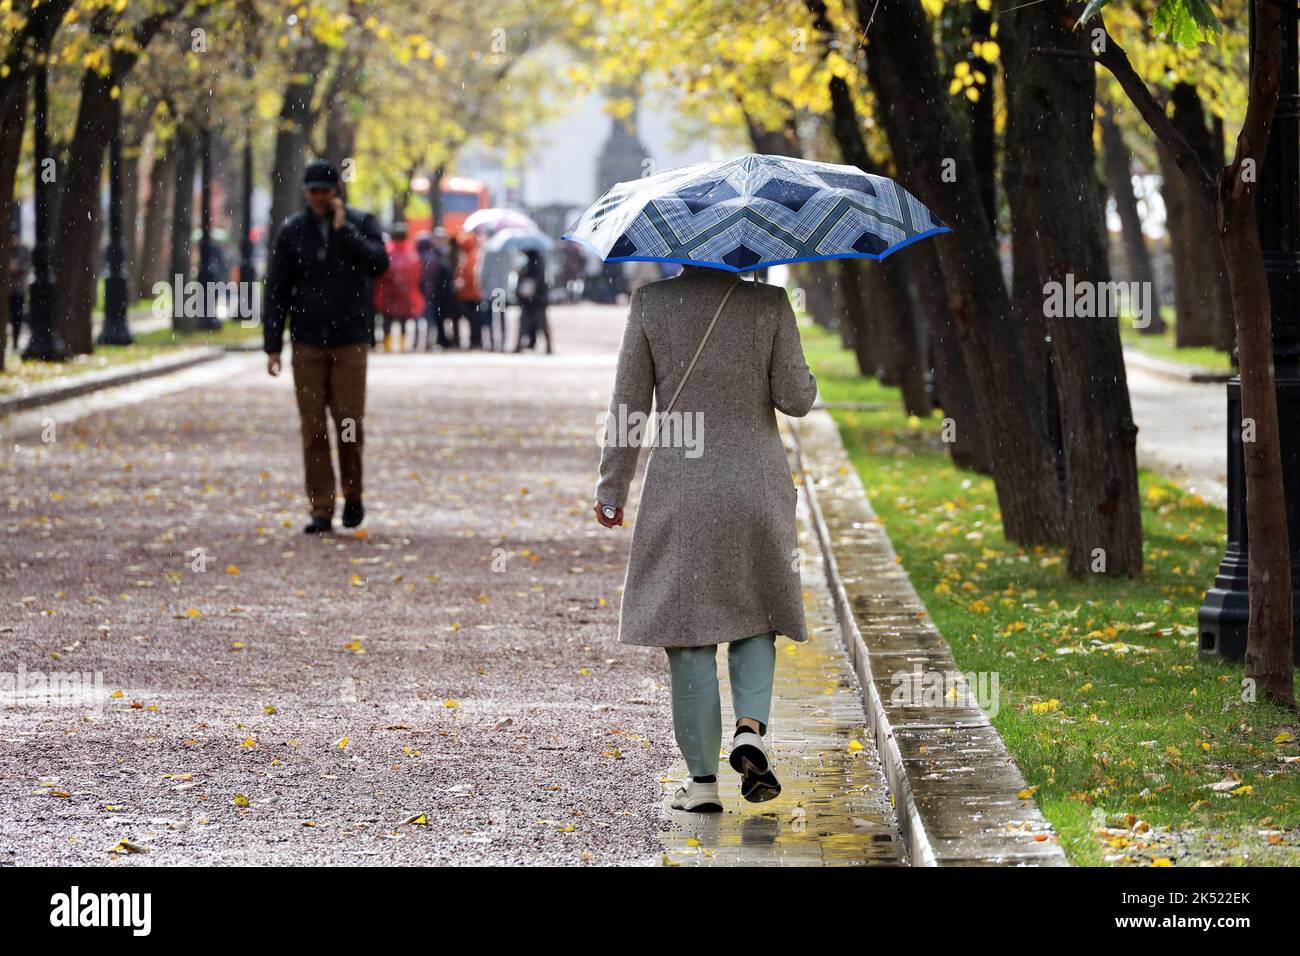 Rain in autumn season, woman with umbrella walking on falling leaves in city park on people background Stock Photo